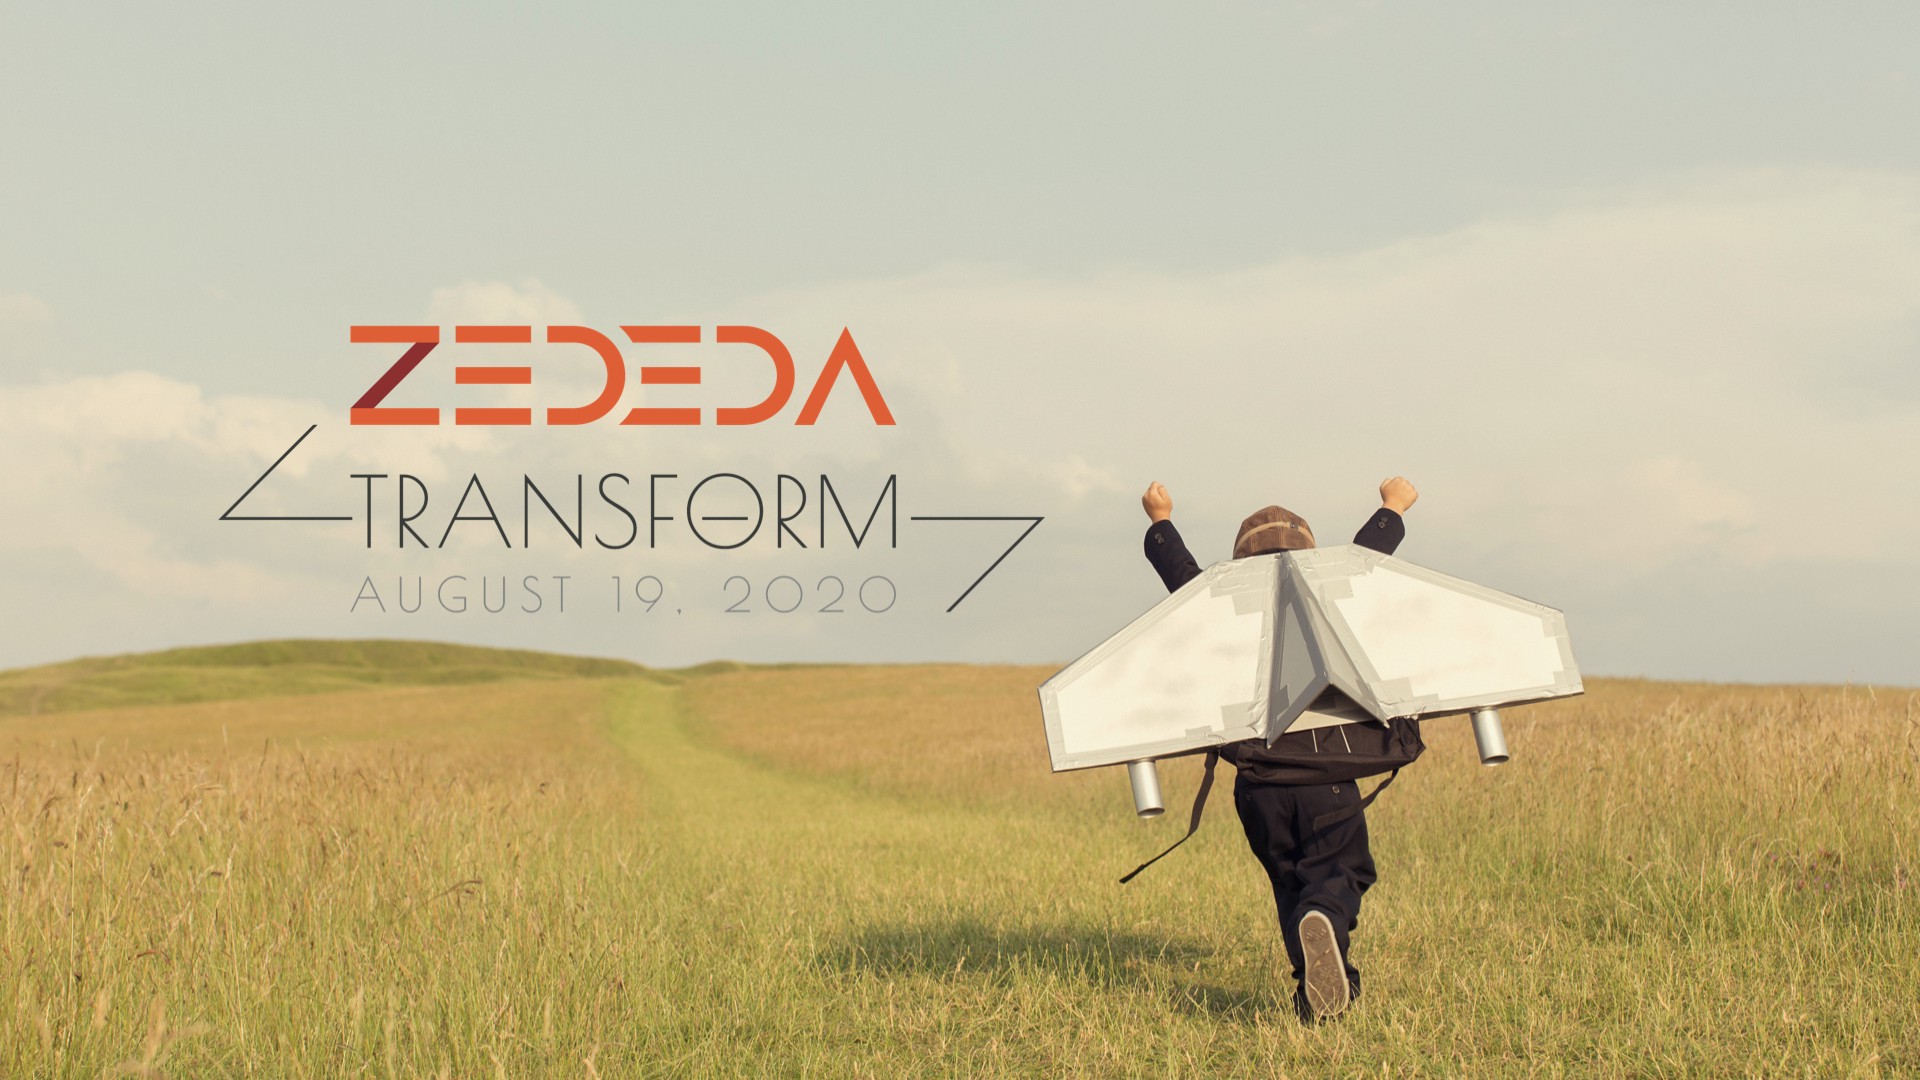 Highlights from ZEDEDA Transform, the Industry’s First Open Ecosystem Conference for Edge and IoT